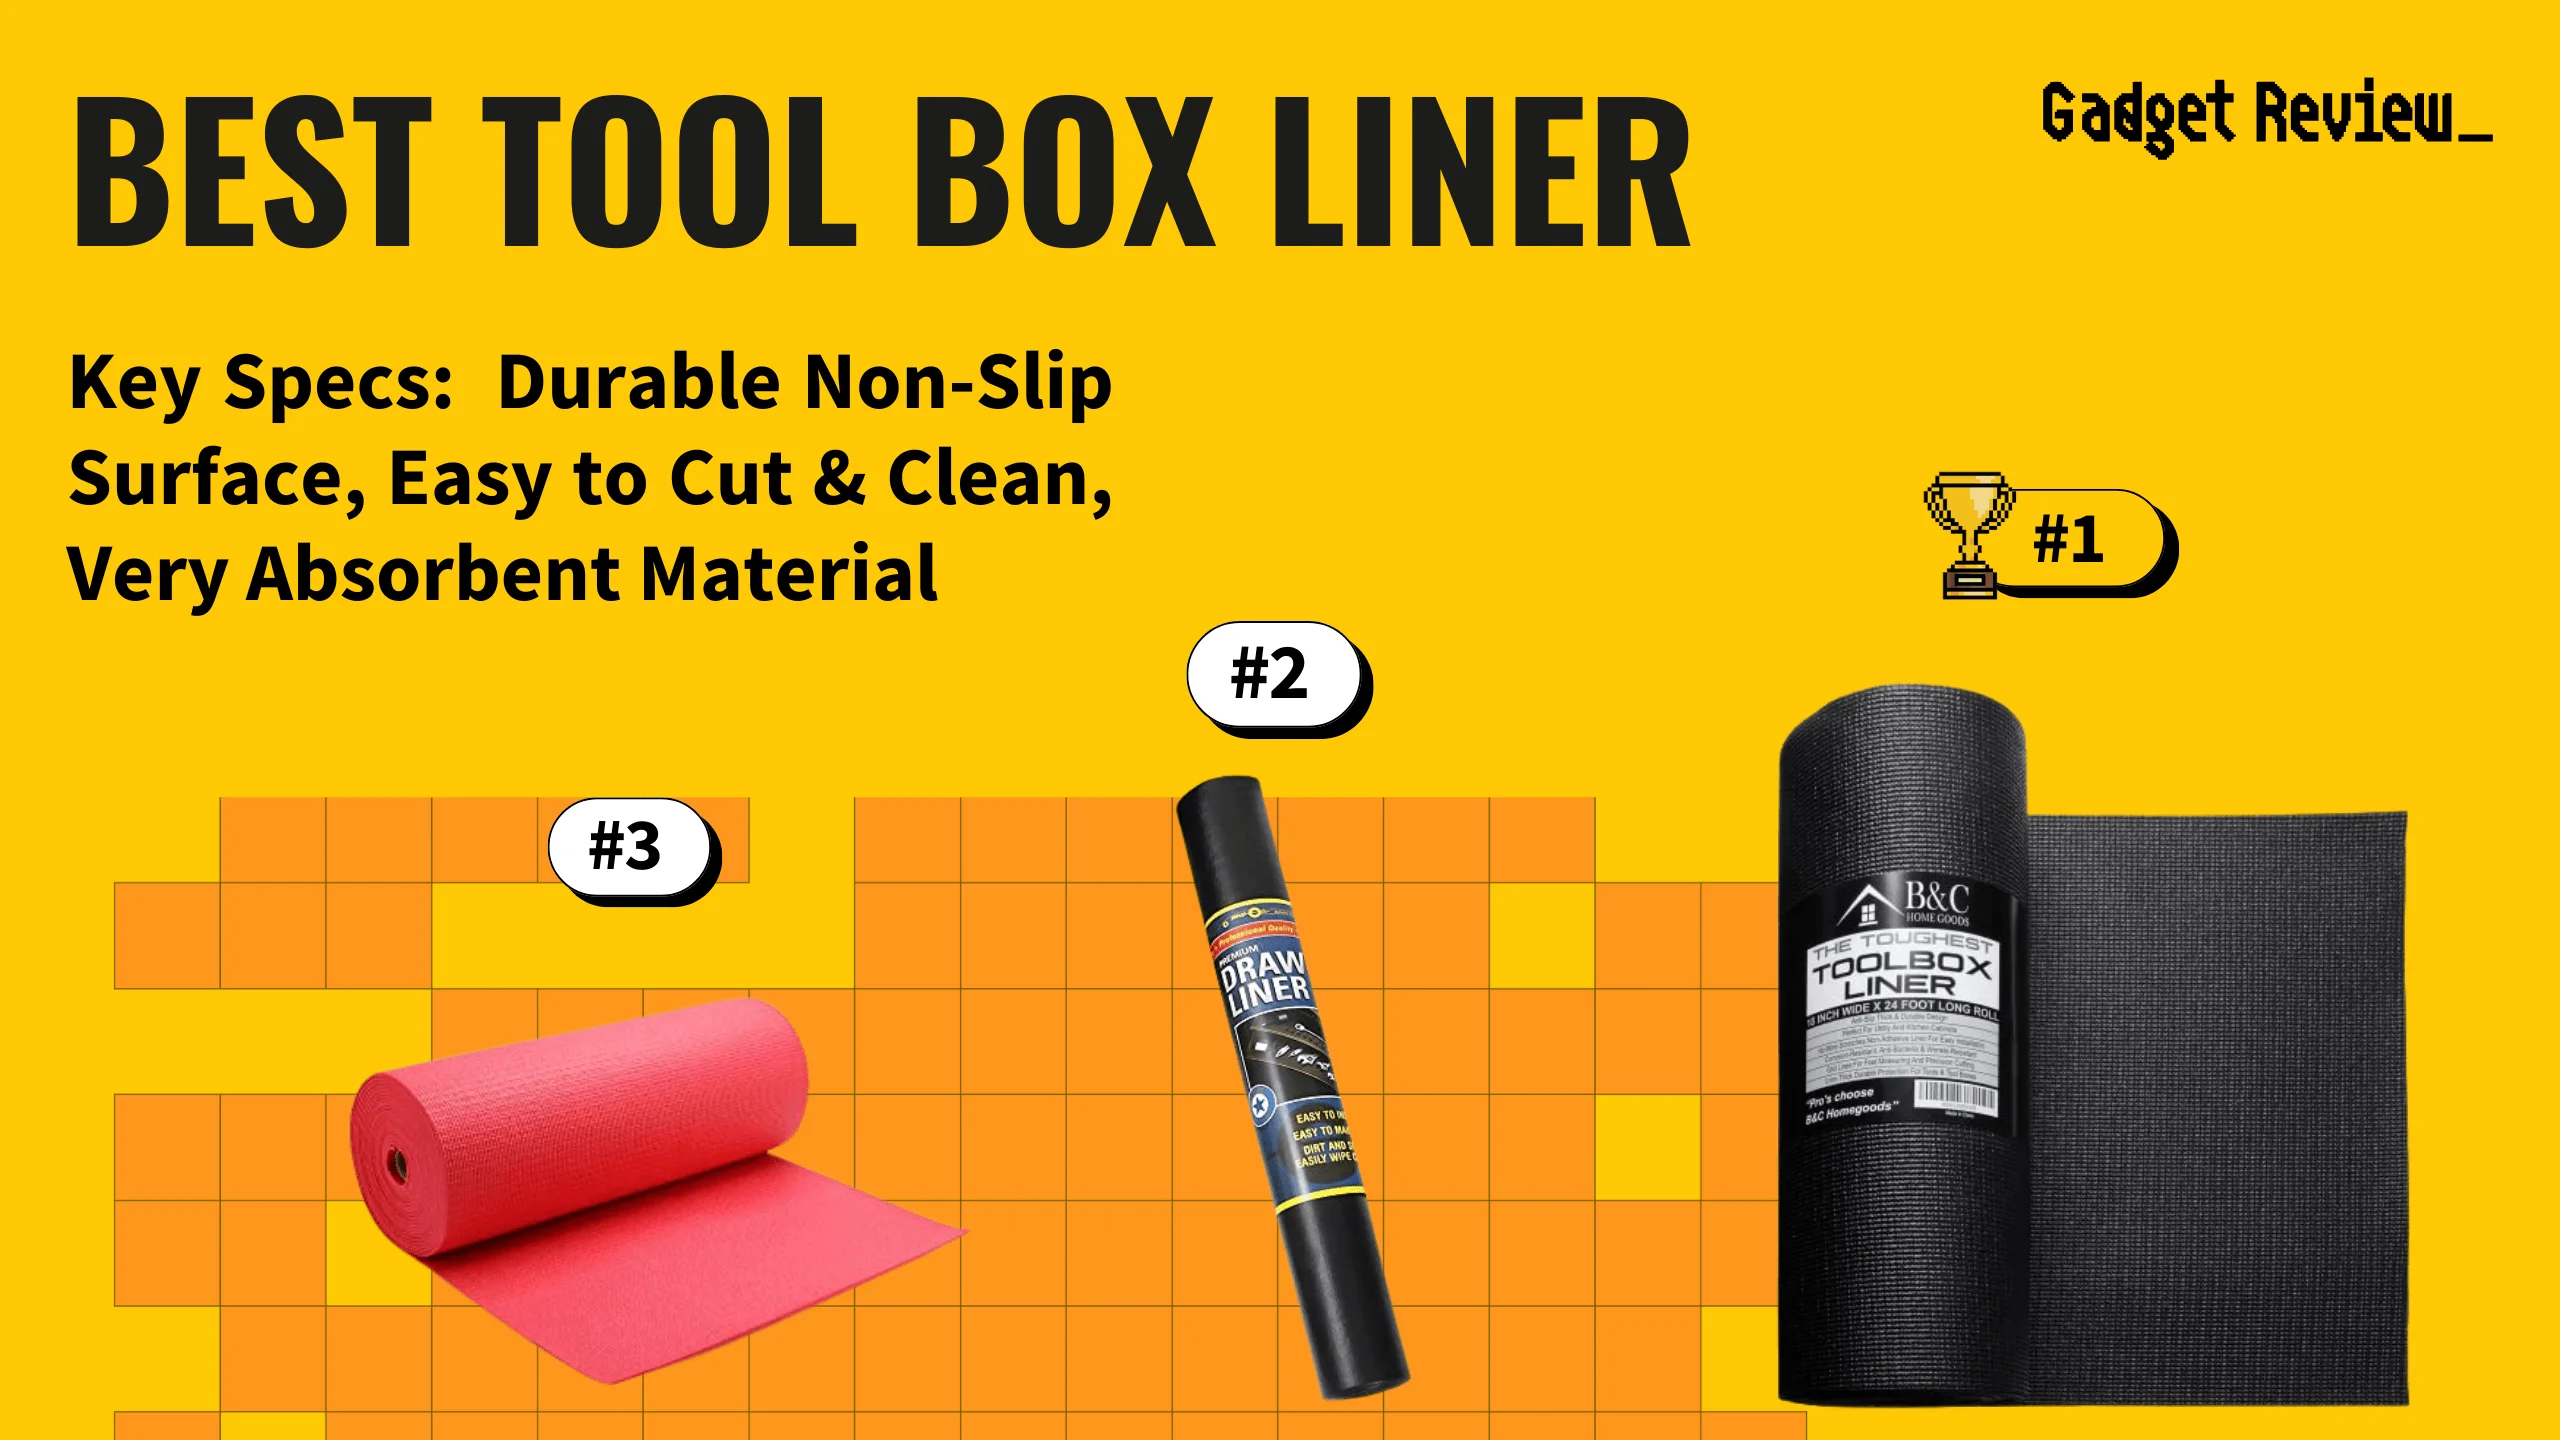 best tool box liner featured image that shows the top three best tool models